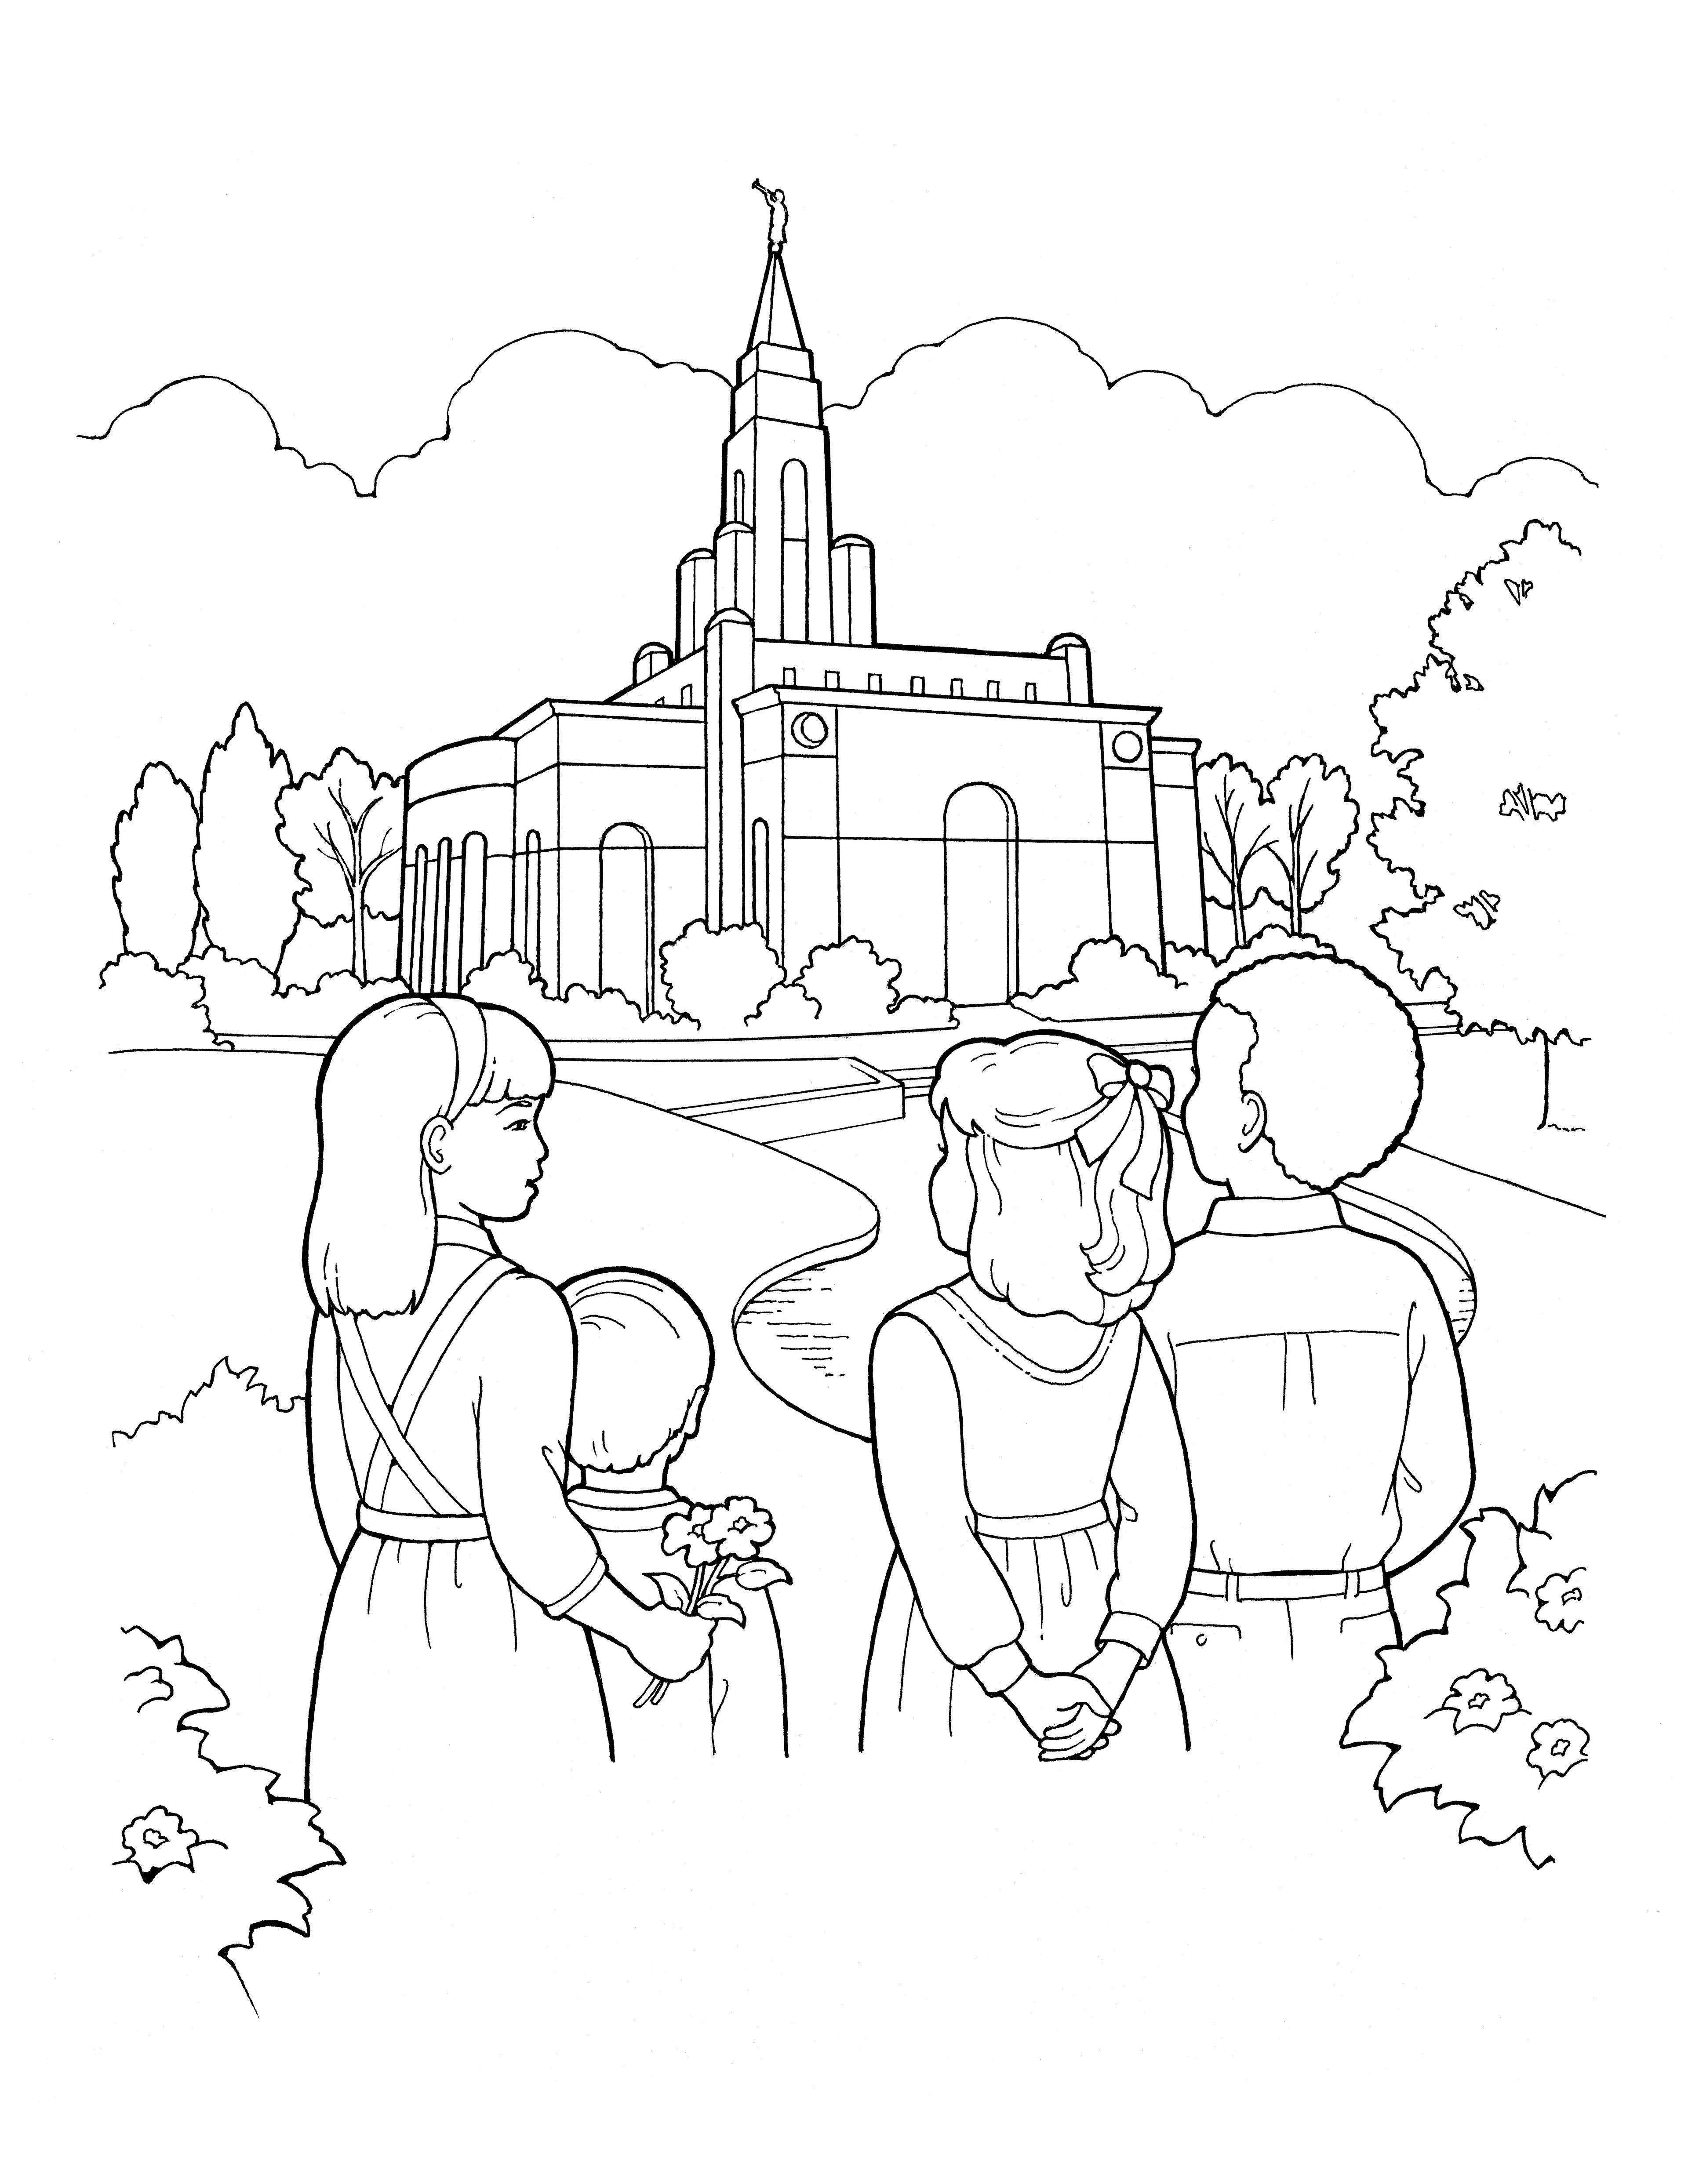 An image of children gazing at a beautiful LDS temple.